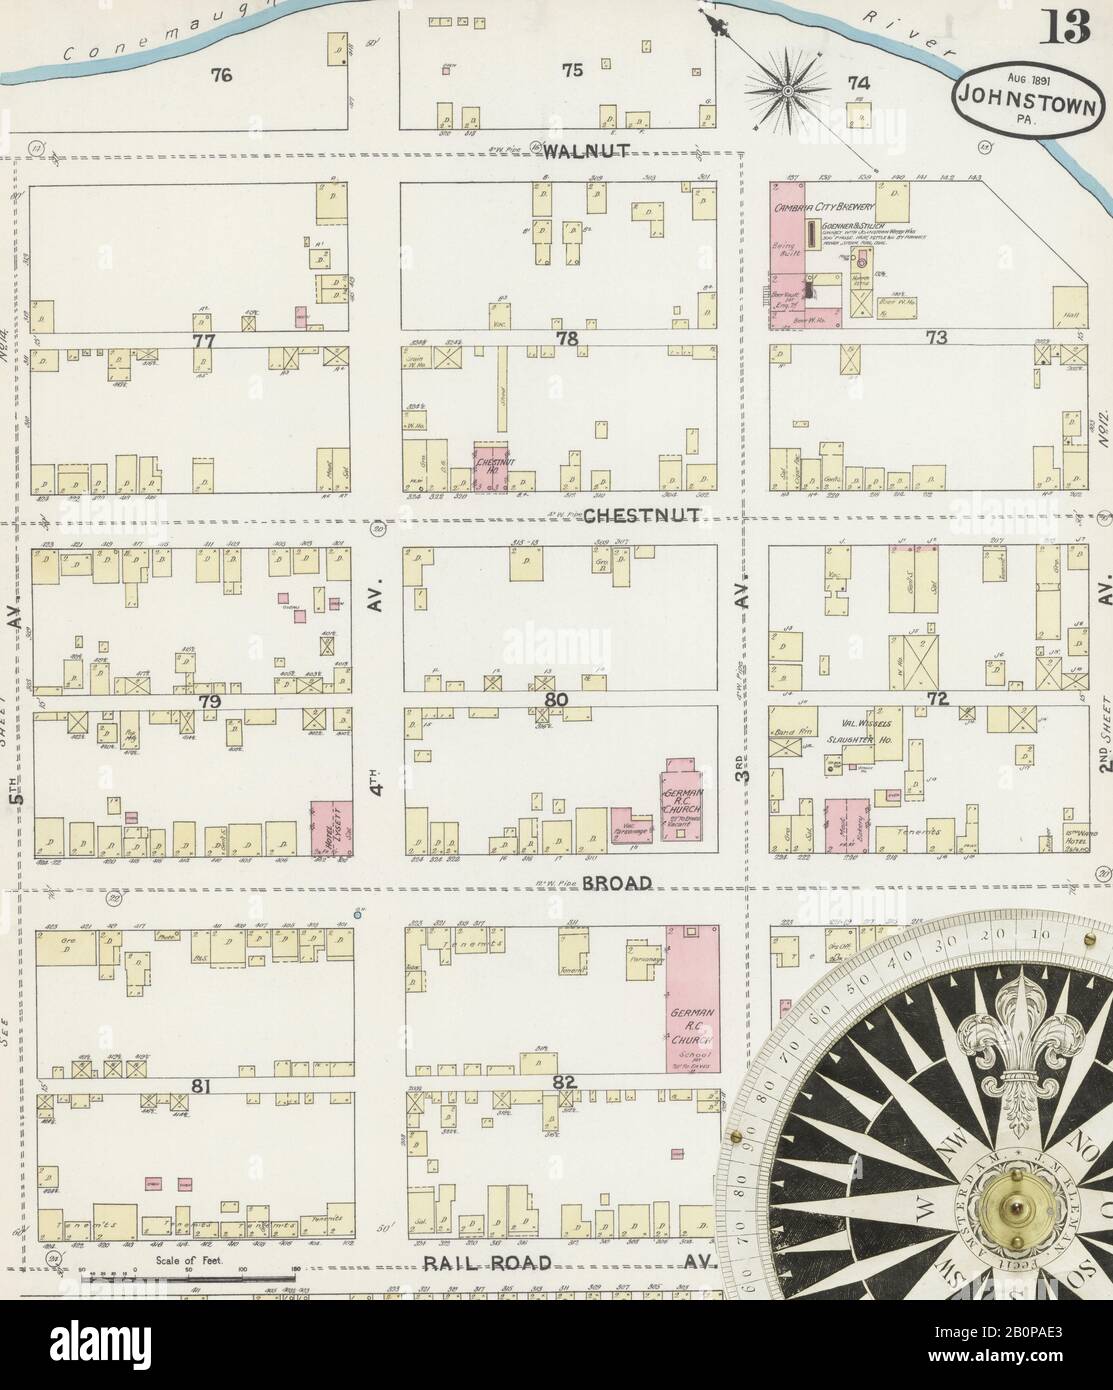 Image 13 of Sanborn Fire Insurance Map from Johnstown, Cambria County, Pennsylvania. Aug 1891. 21 Sheet(s), America, street map with a Nineteenth Century compass Stock Photo